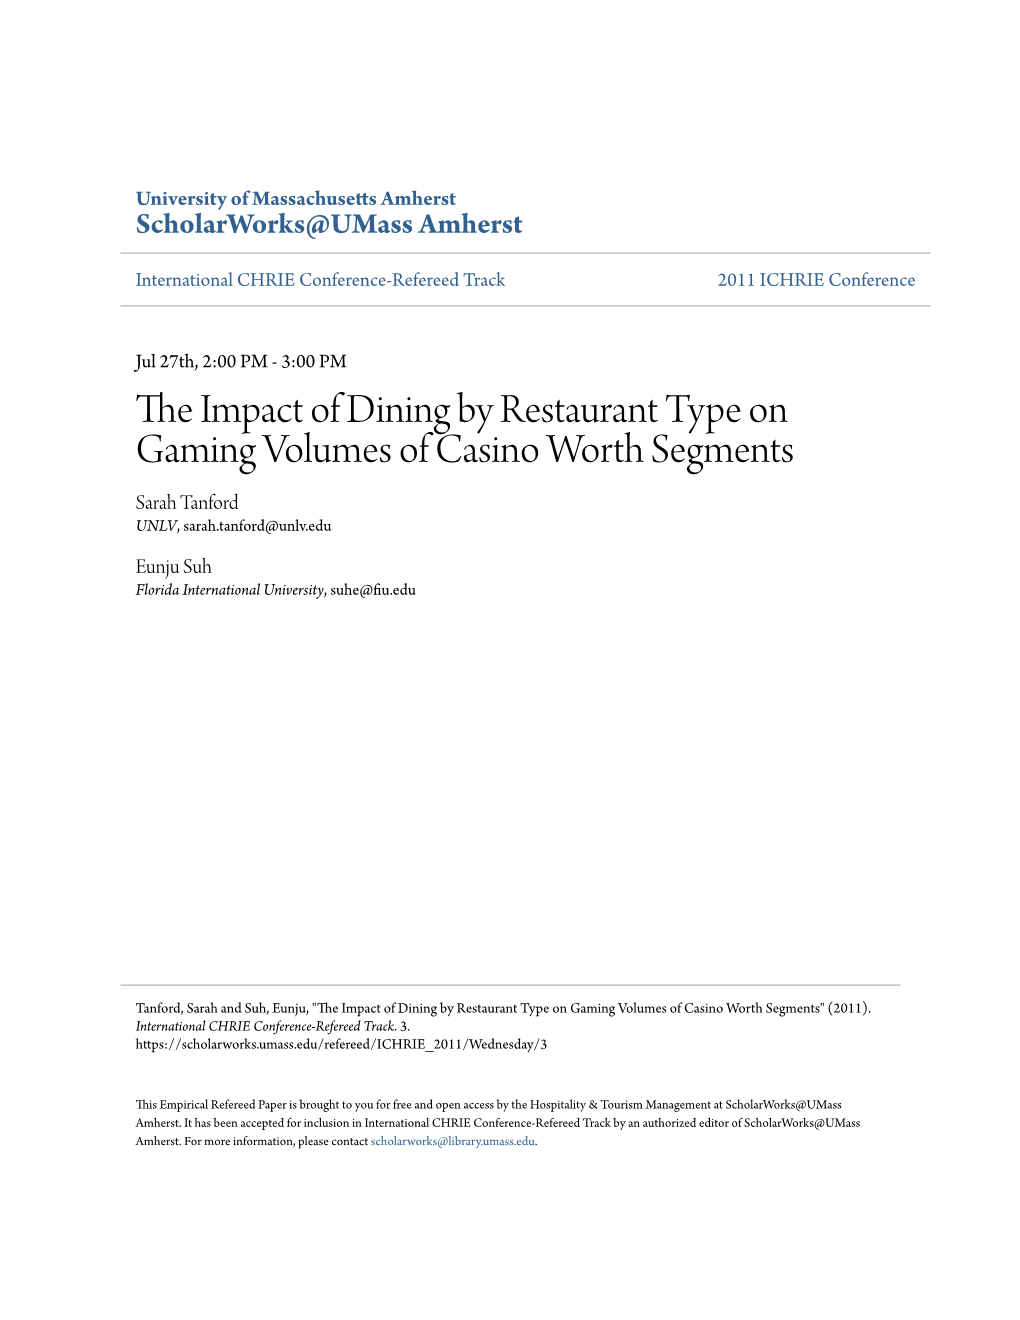 The Impact of Dining by Restaurant Type on Gaming Volumes of Casino Worth Segments